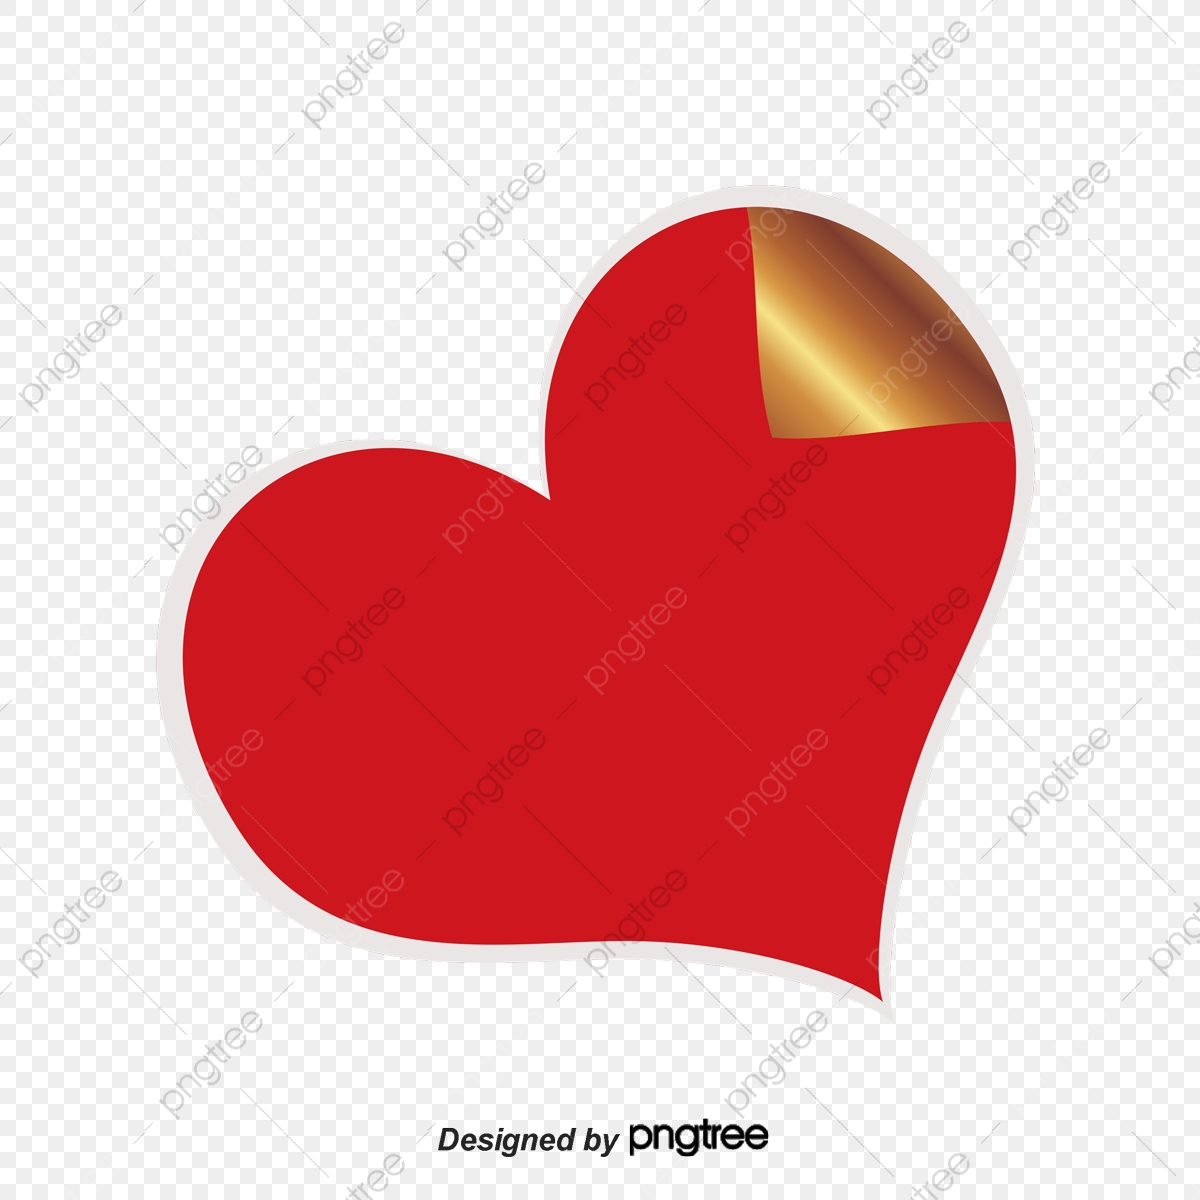 Heart Shaped Origami Art Vector Heart Shaped Origami Red Model Creative Png And Vector